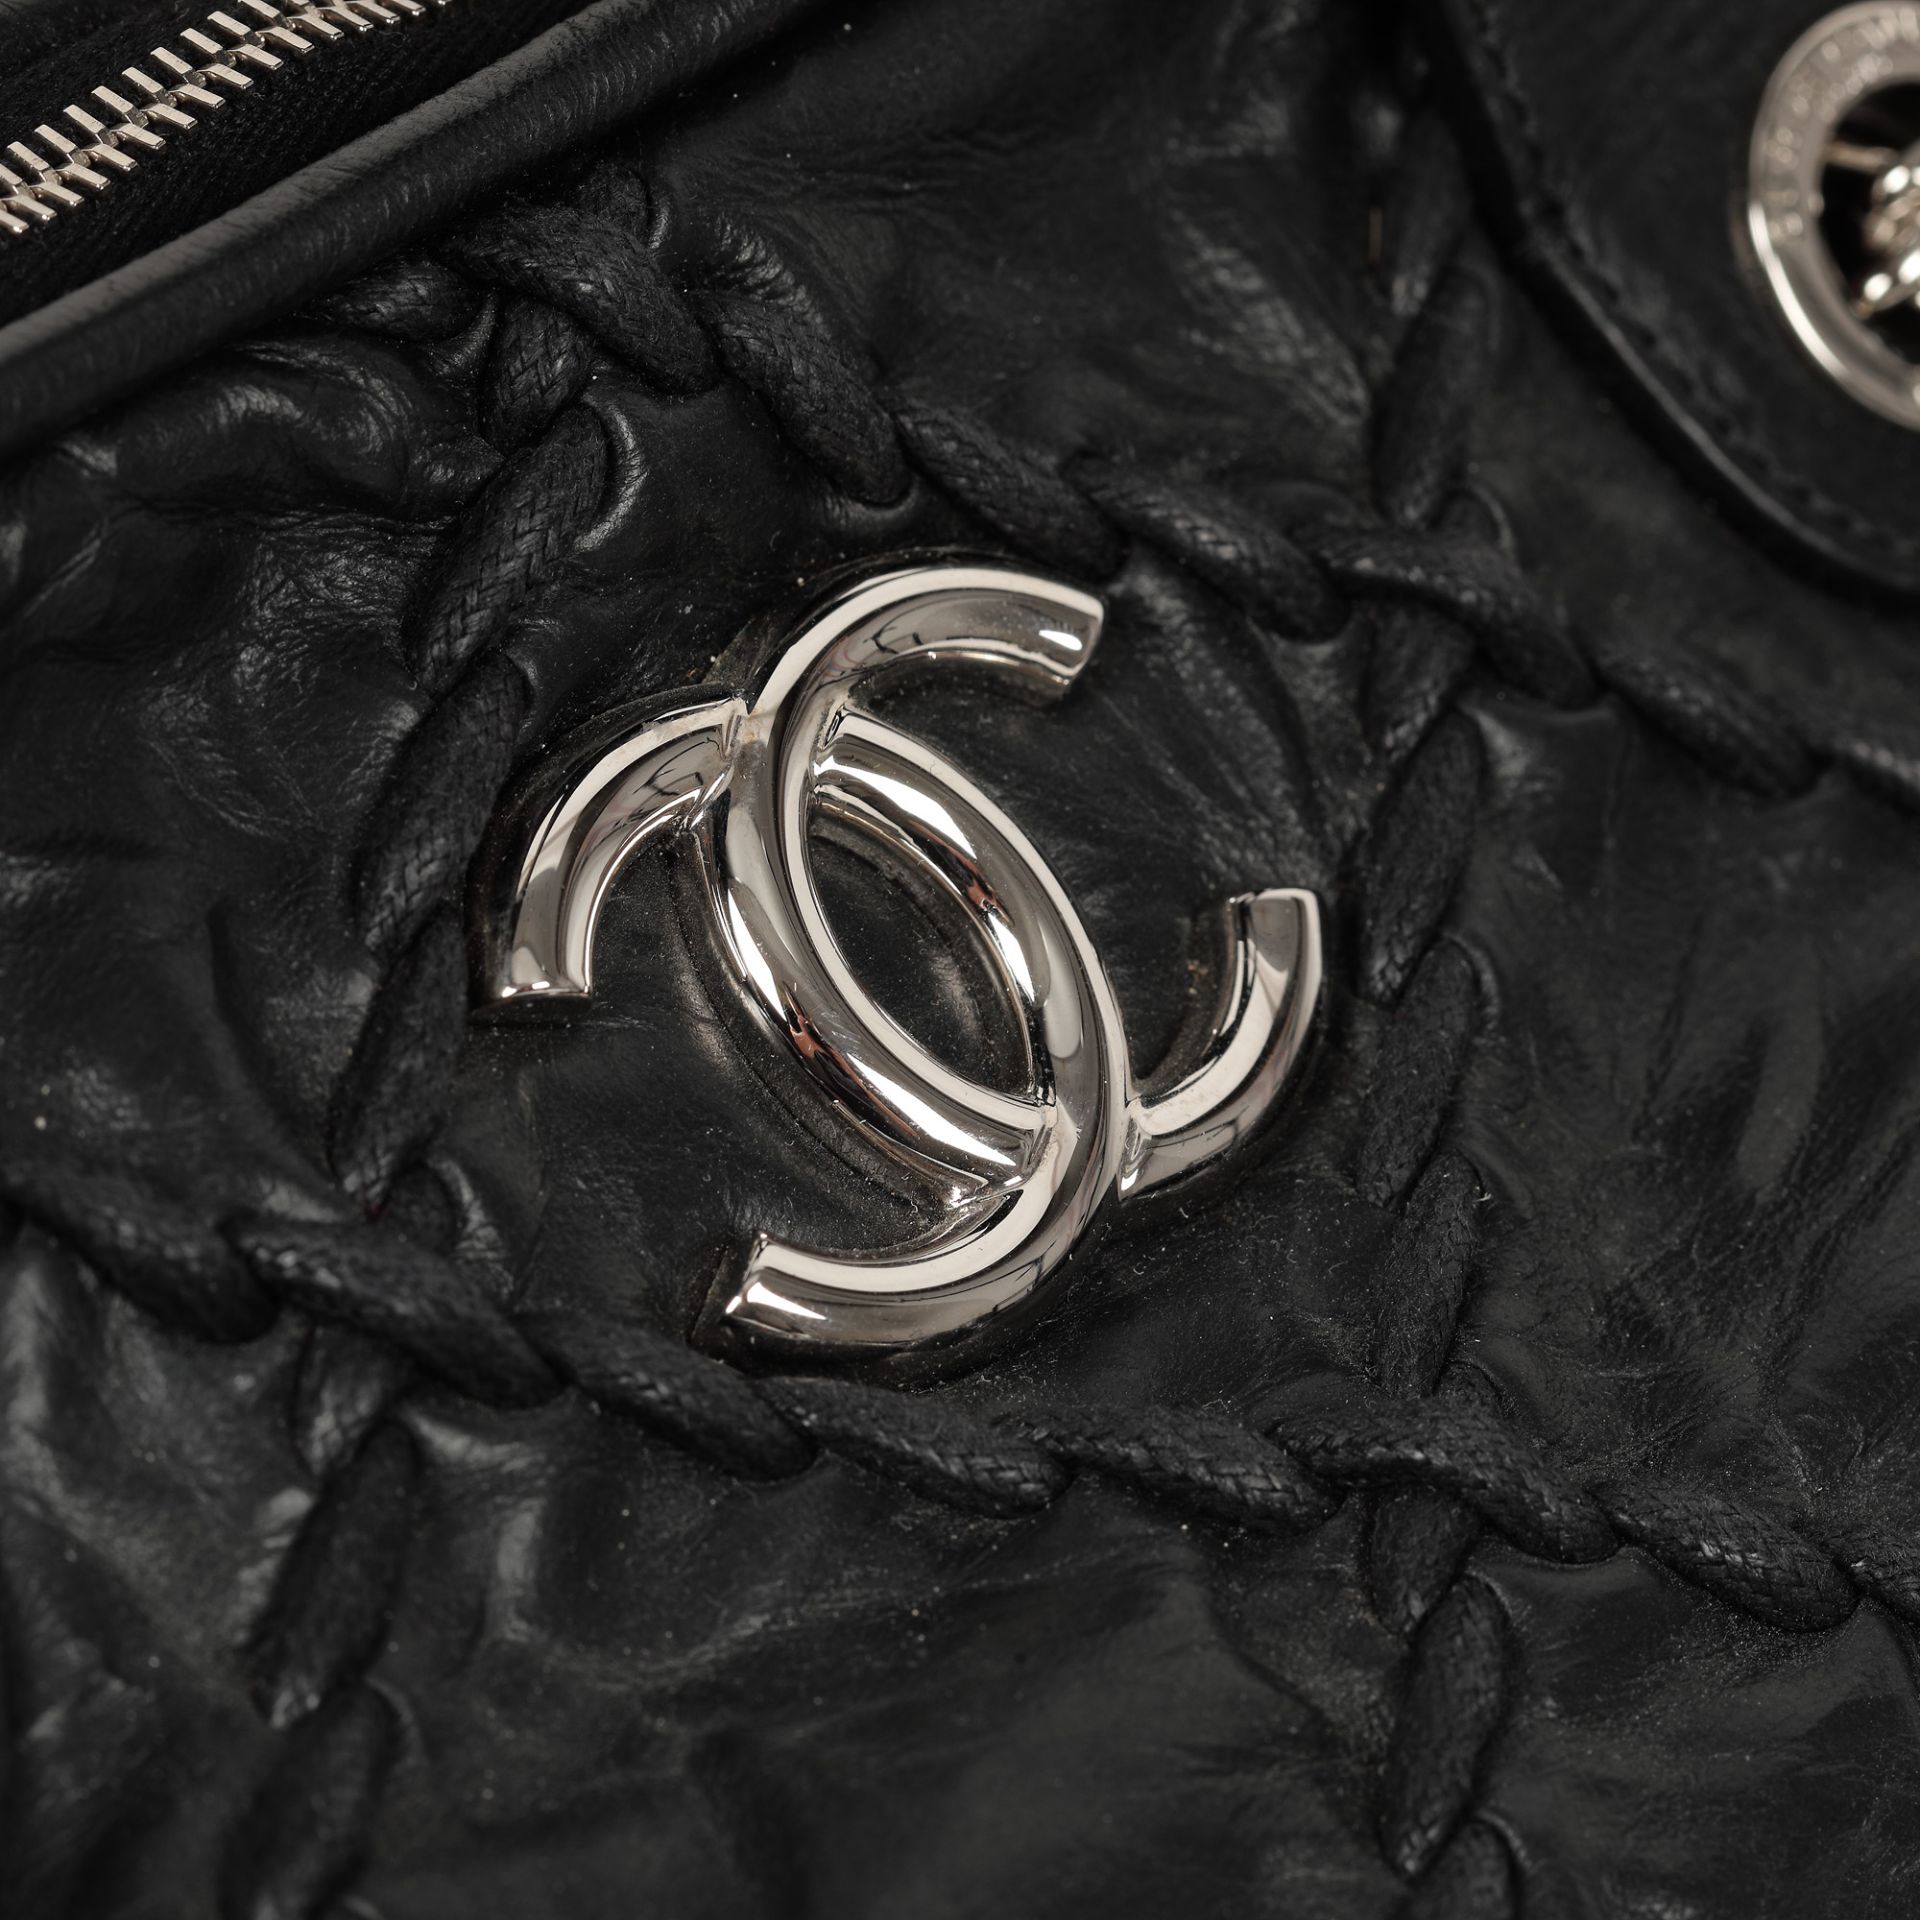 "Ultra Stitch Bowling Bag", Chanel bag, quilted leather, black, authenticity card and original cover - Image 3 of 4